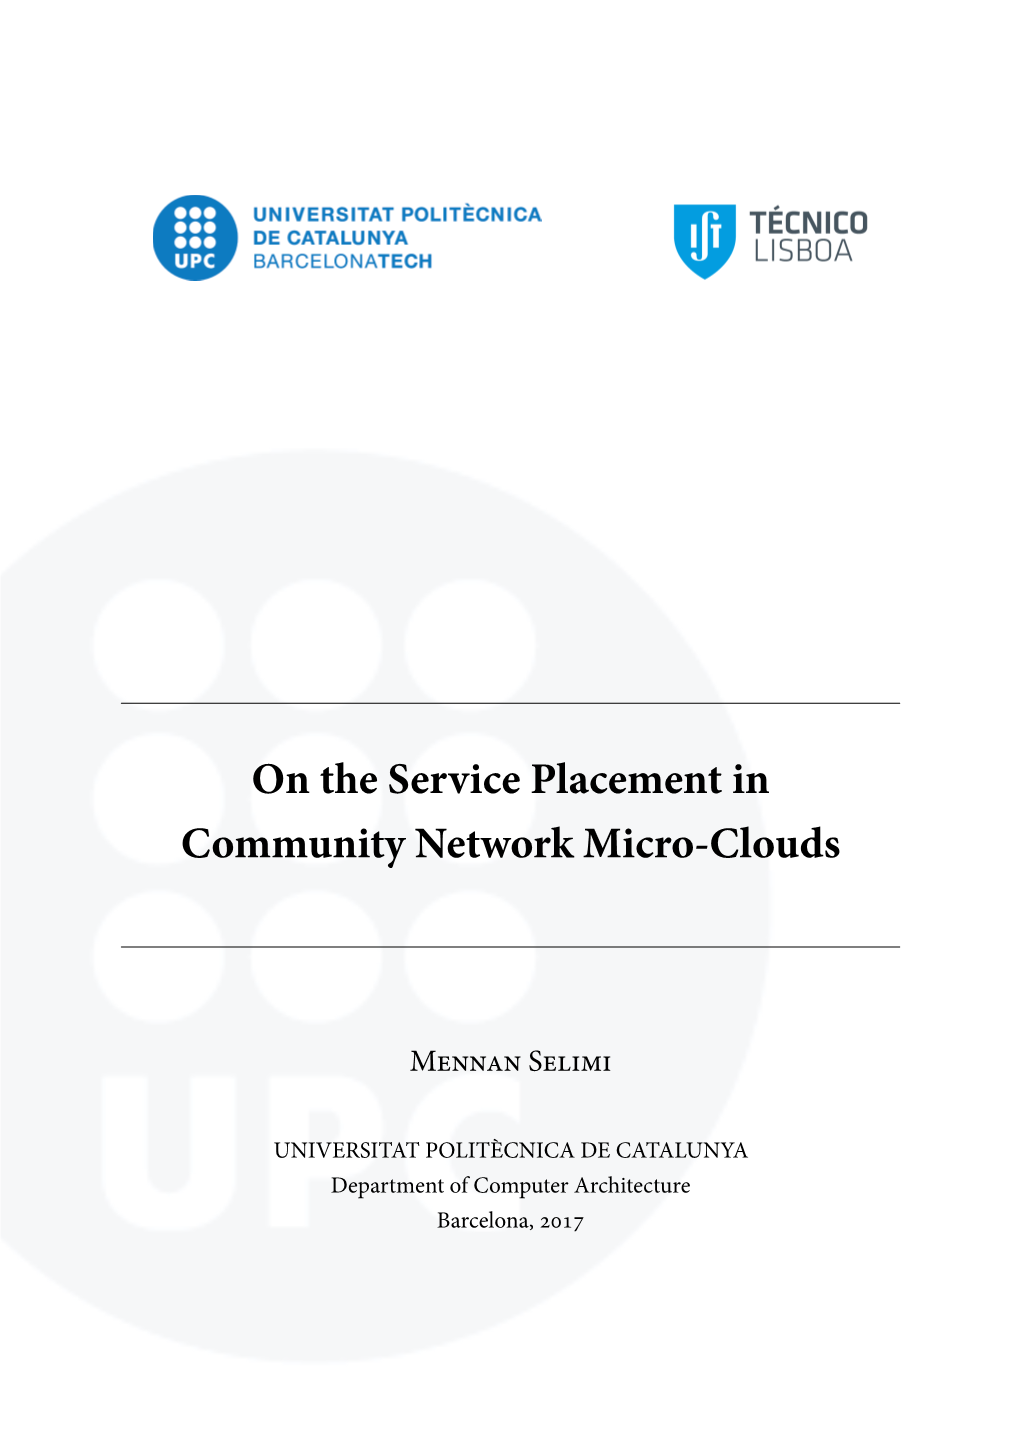 On the Service Placement in Community Network Micro-Clouds